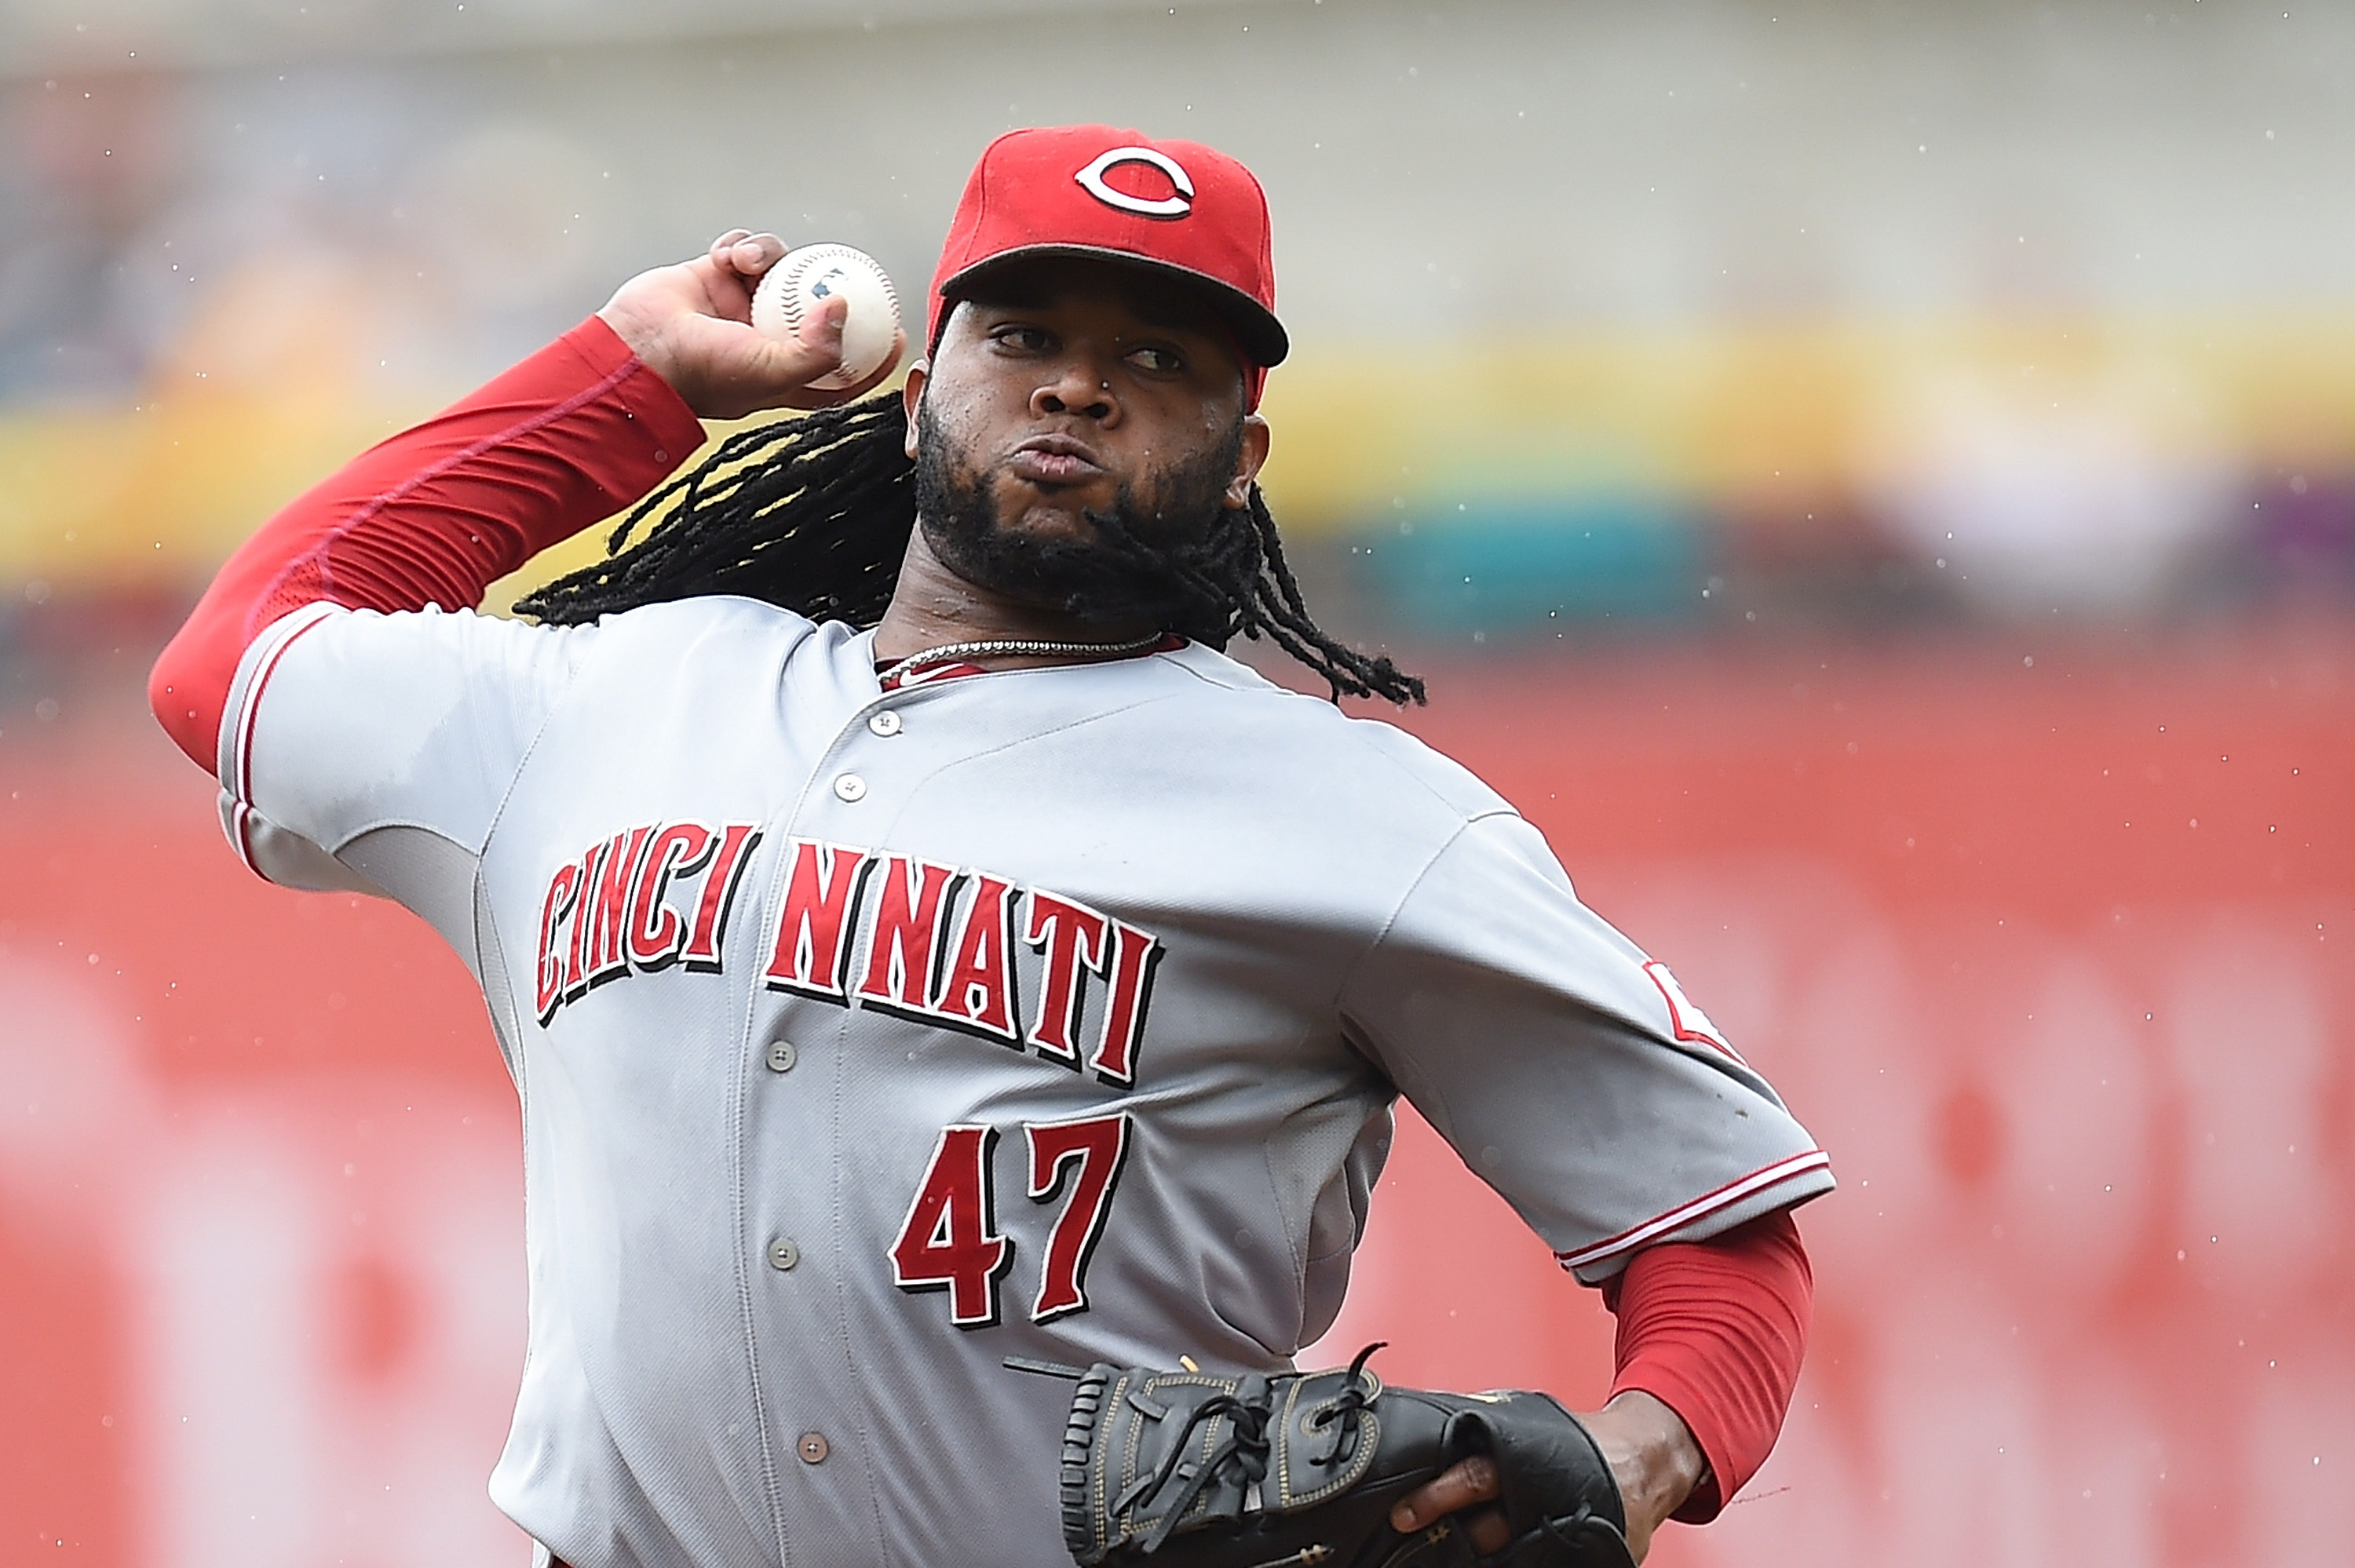 Cueto fans 10 in debut for Reds